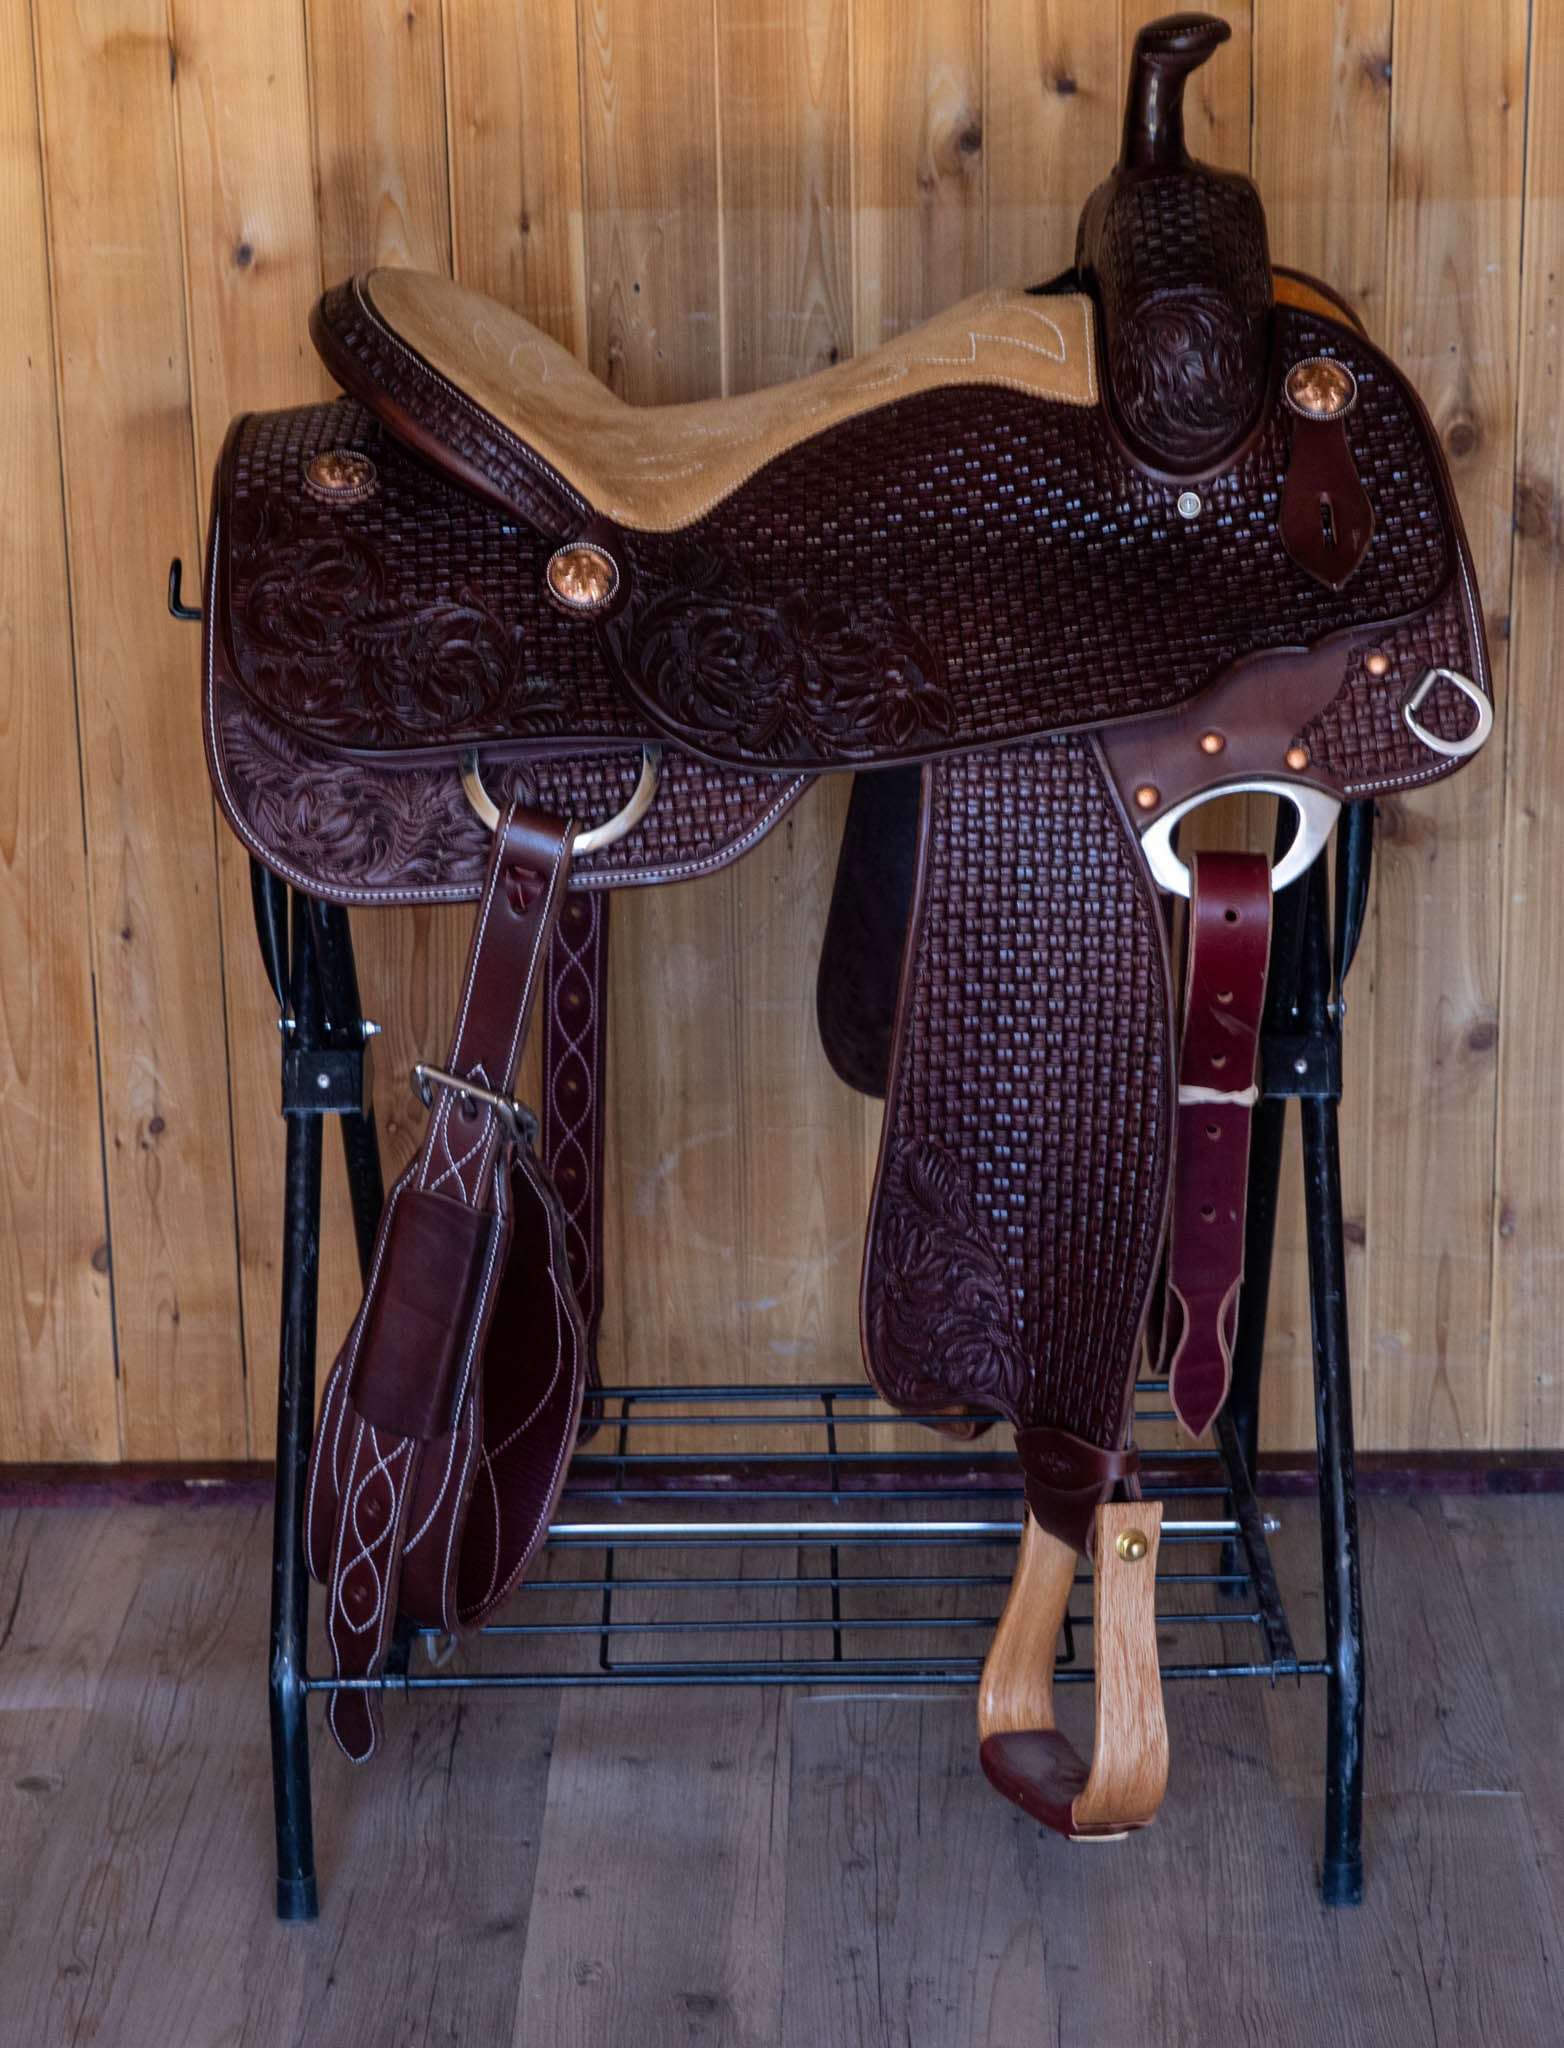 Ranch Cutter Saddle 16.5" Chocolate w/ Floral and Bamboo Accents